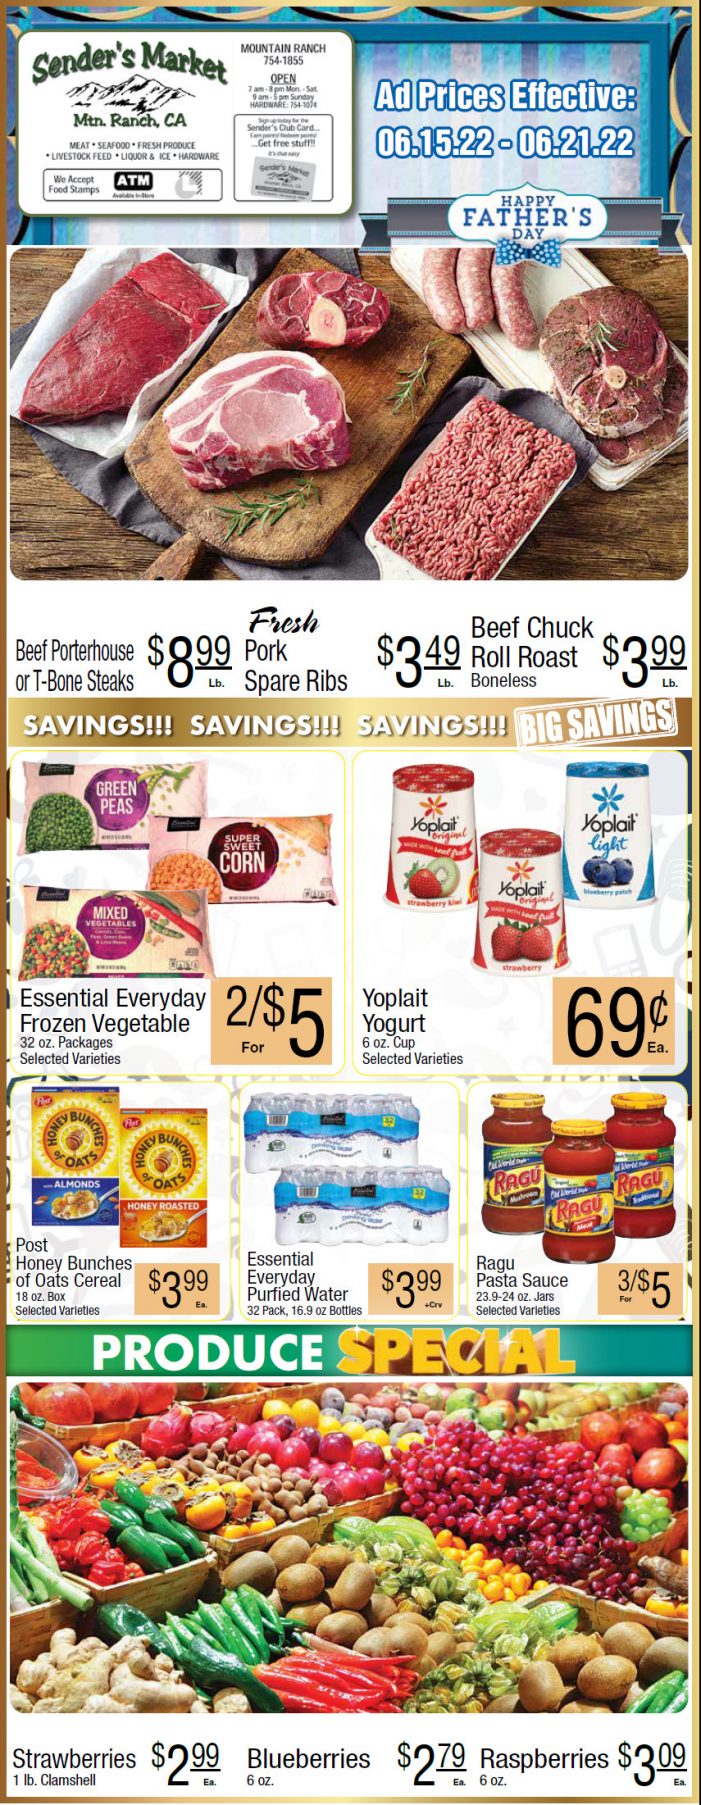 Sender’s Market Weekly Ad & Grocery Specials June 15 – 21!  Shop Local & Save!